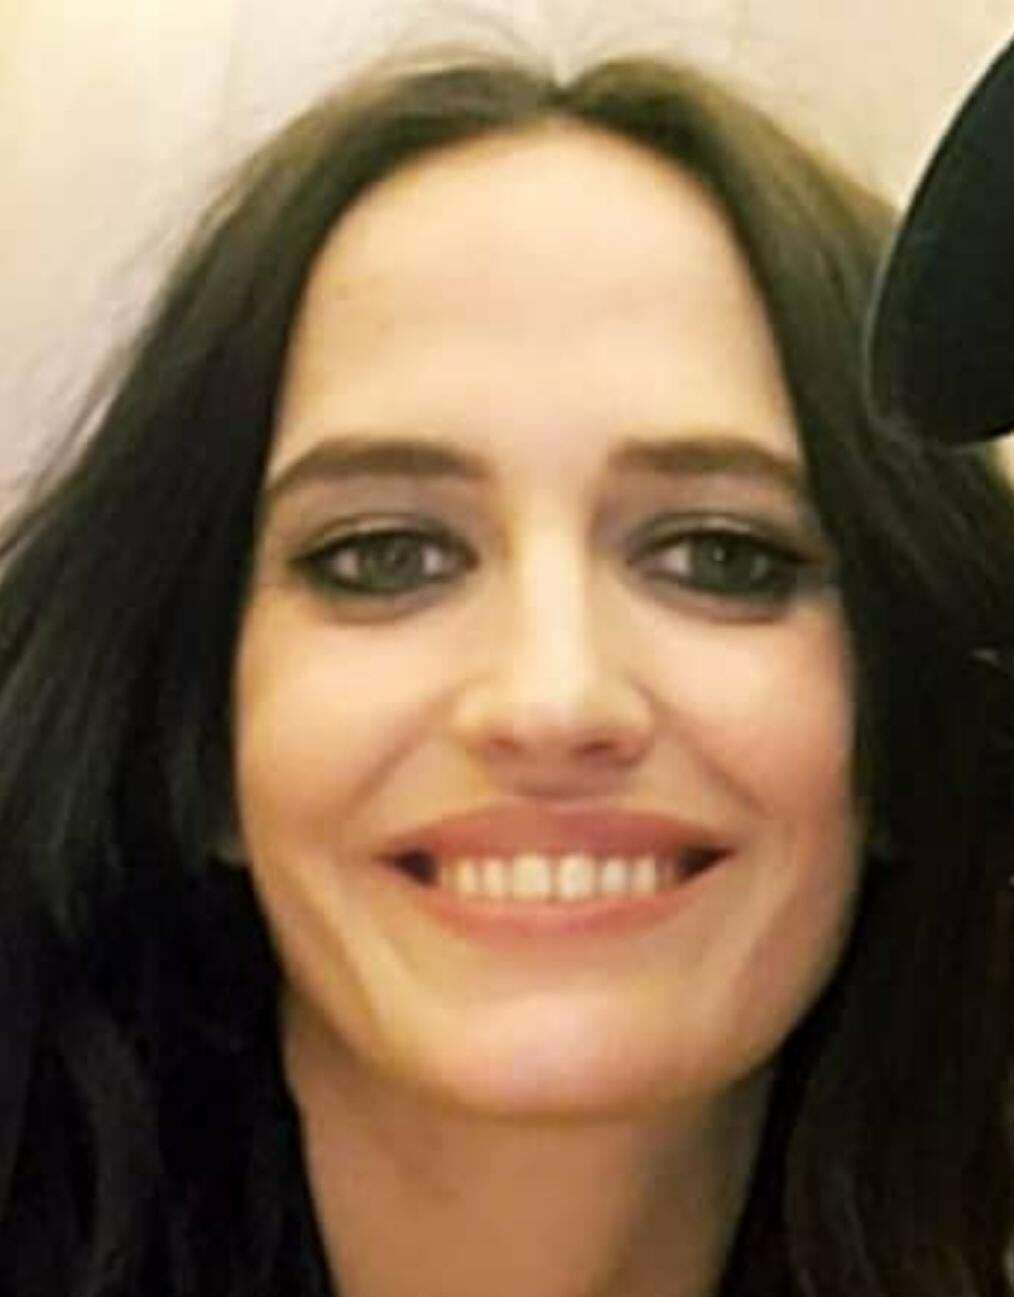 How will you fuck naked Eva Green in bed